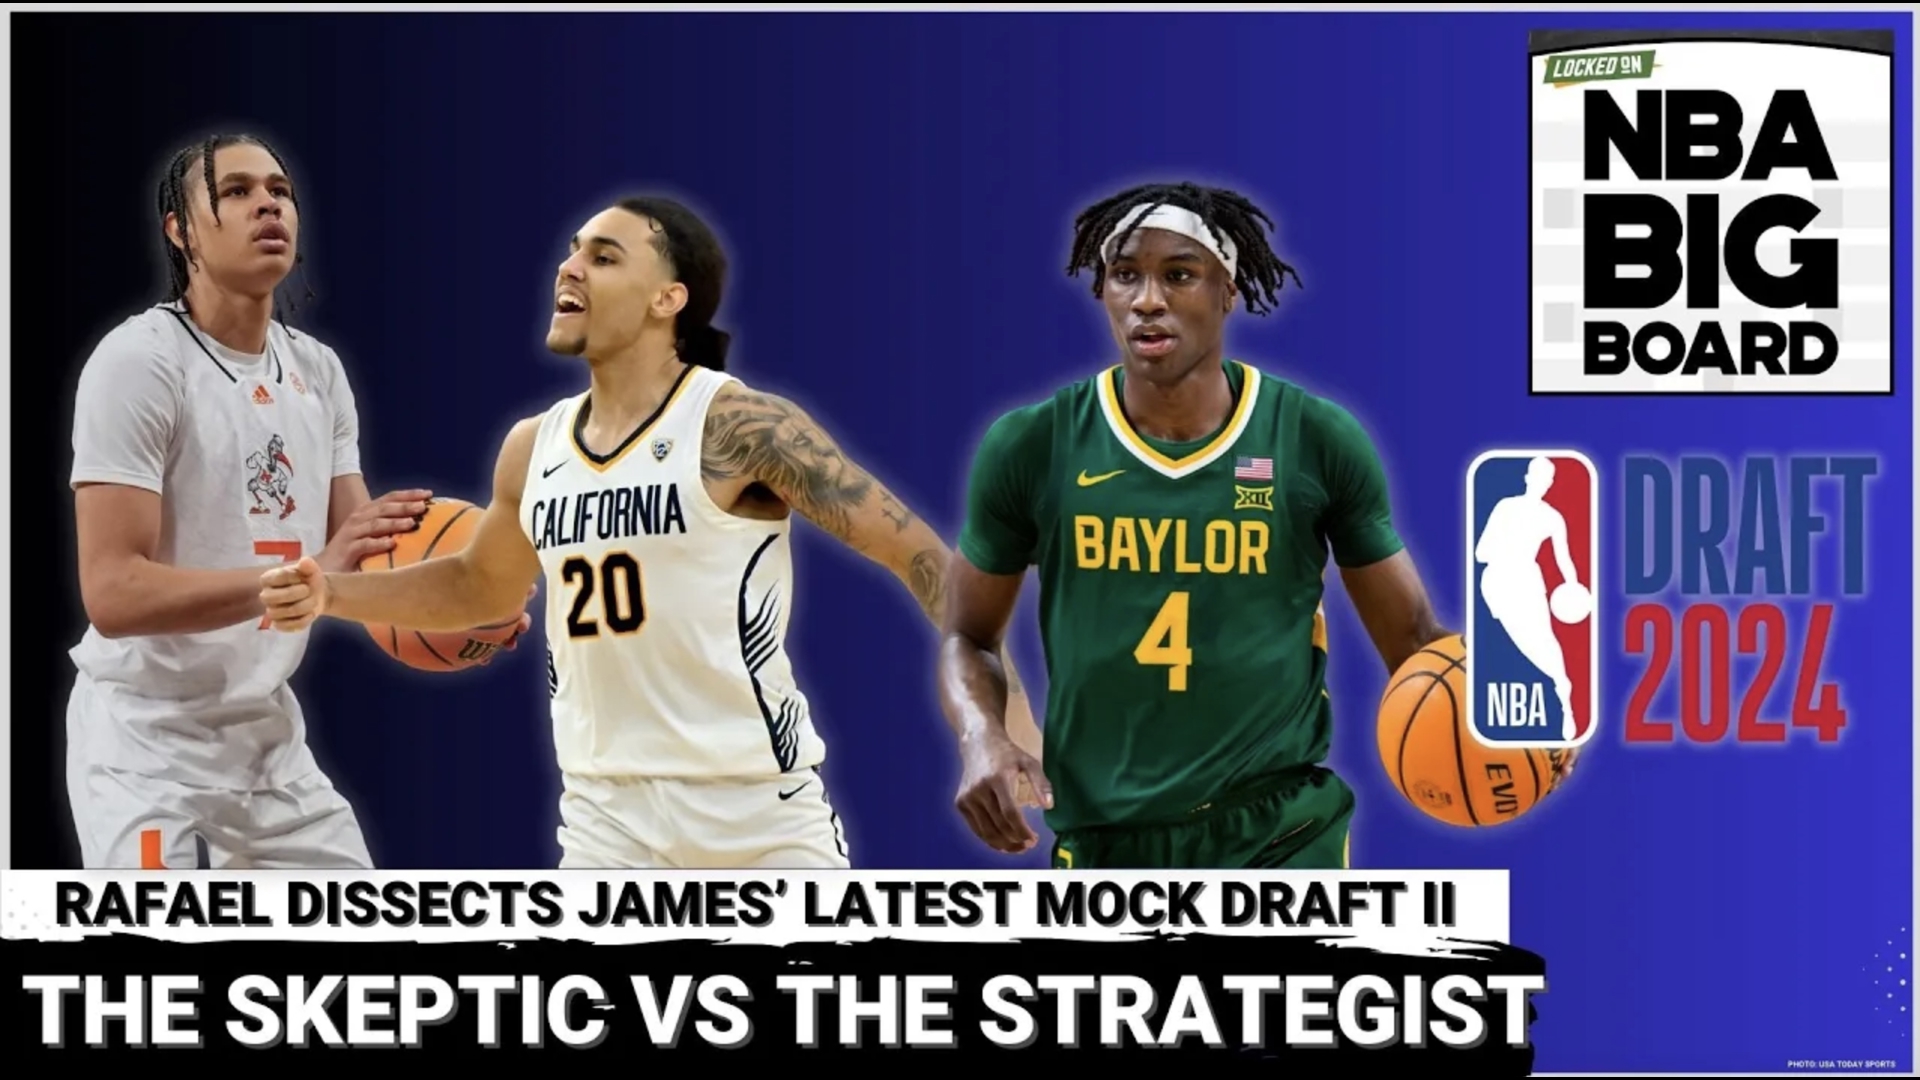 In this installment of the Locked On NBA Big Board podcast, Rafael and James Barlowe explore James’ most recent Mock Draft.